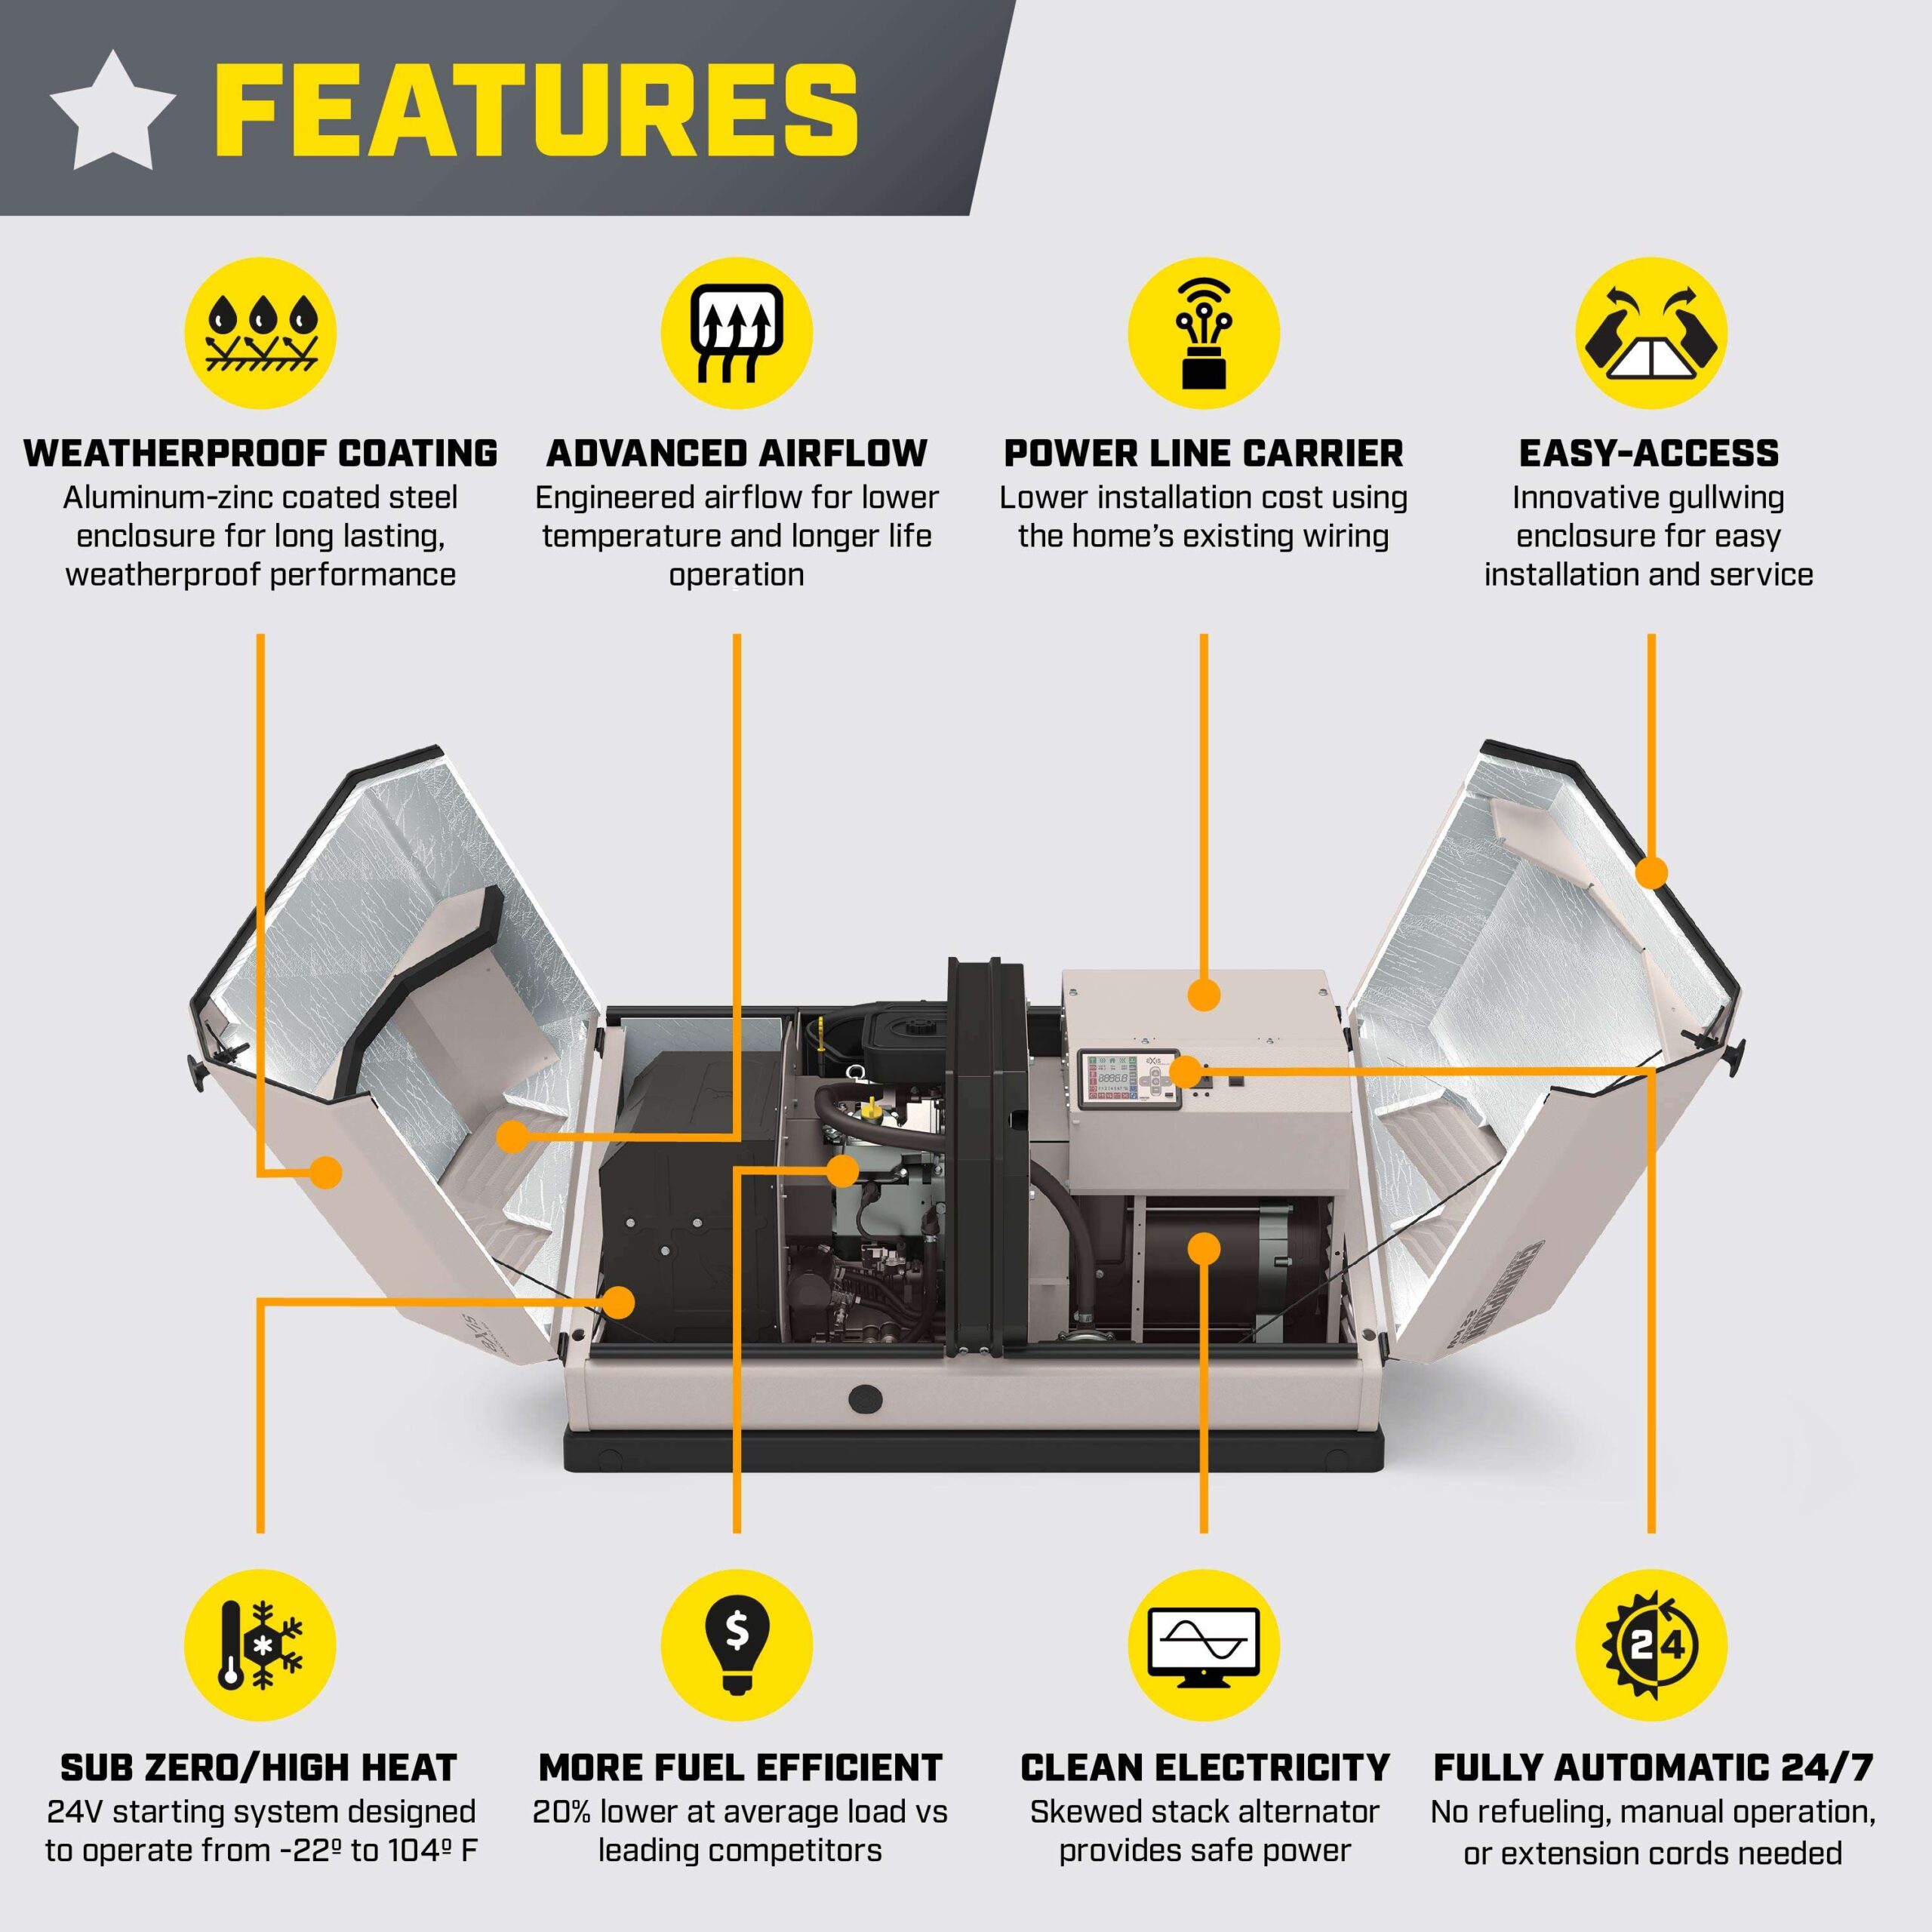 Graphic showing Advanced Features of the Champion 22kW including weatherproof coating, advanced airflow, power line carrier technology, easy access, Sub-zero or high-heat operation, fuel efficiency, clean low THD electricity, and Fully automatic 247.